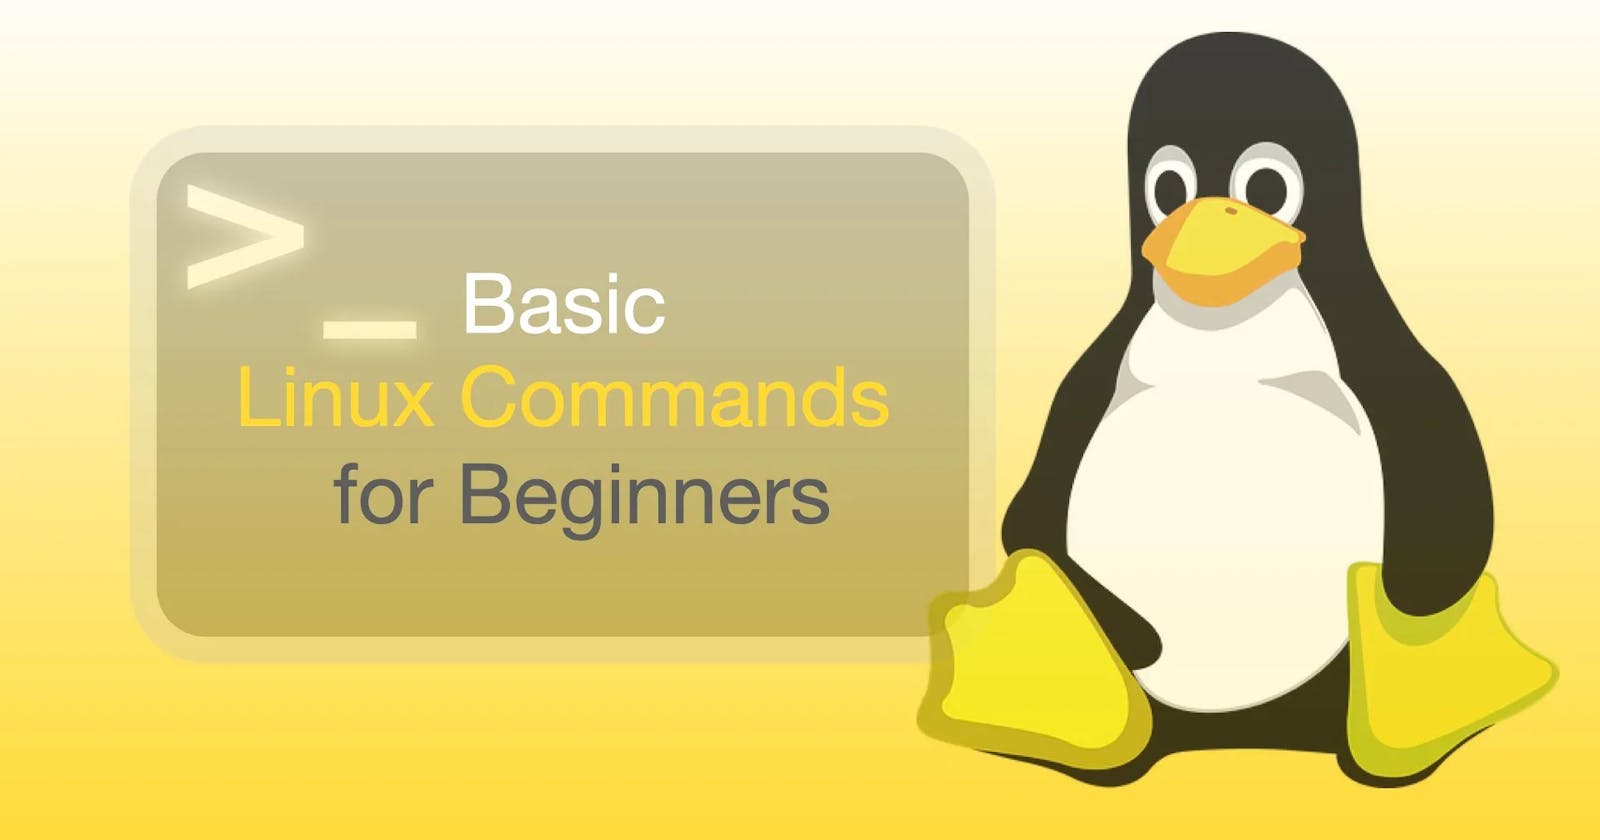 DAY-3 Basic Linux Commands